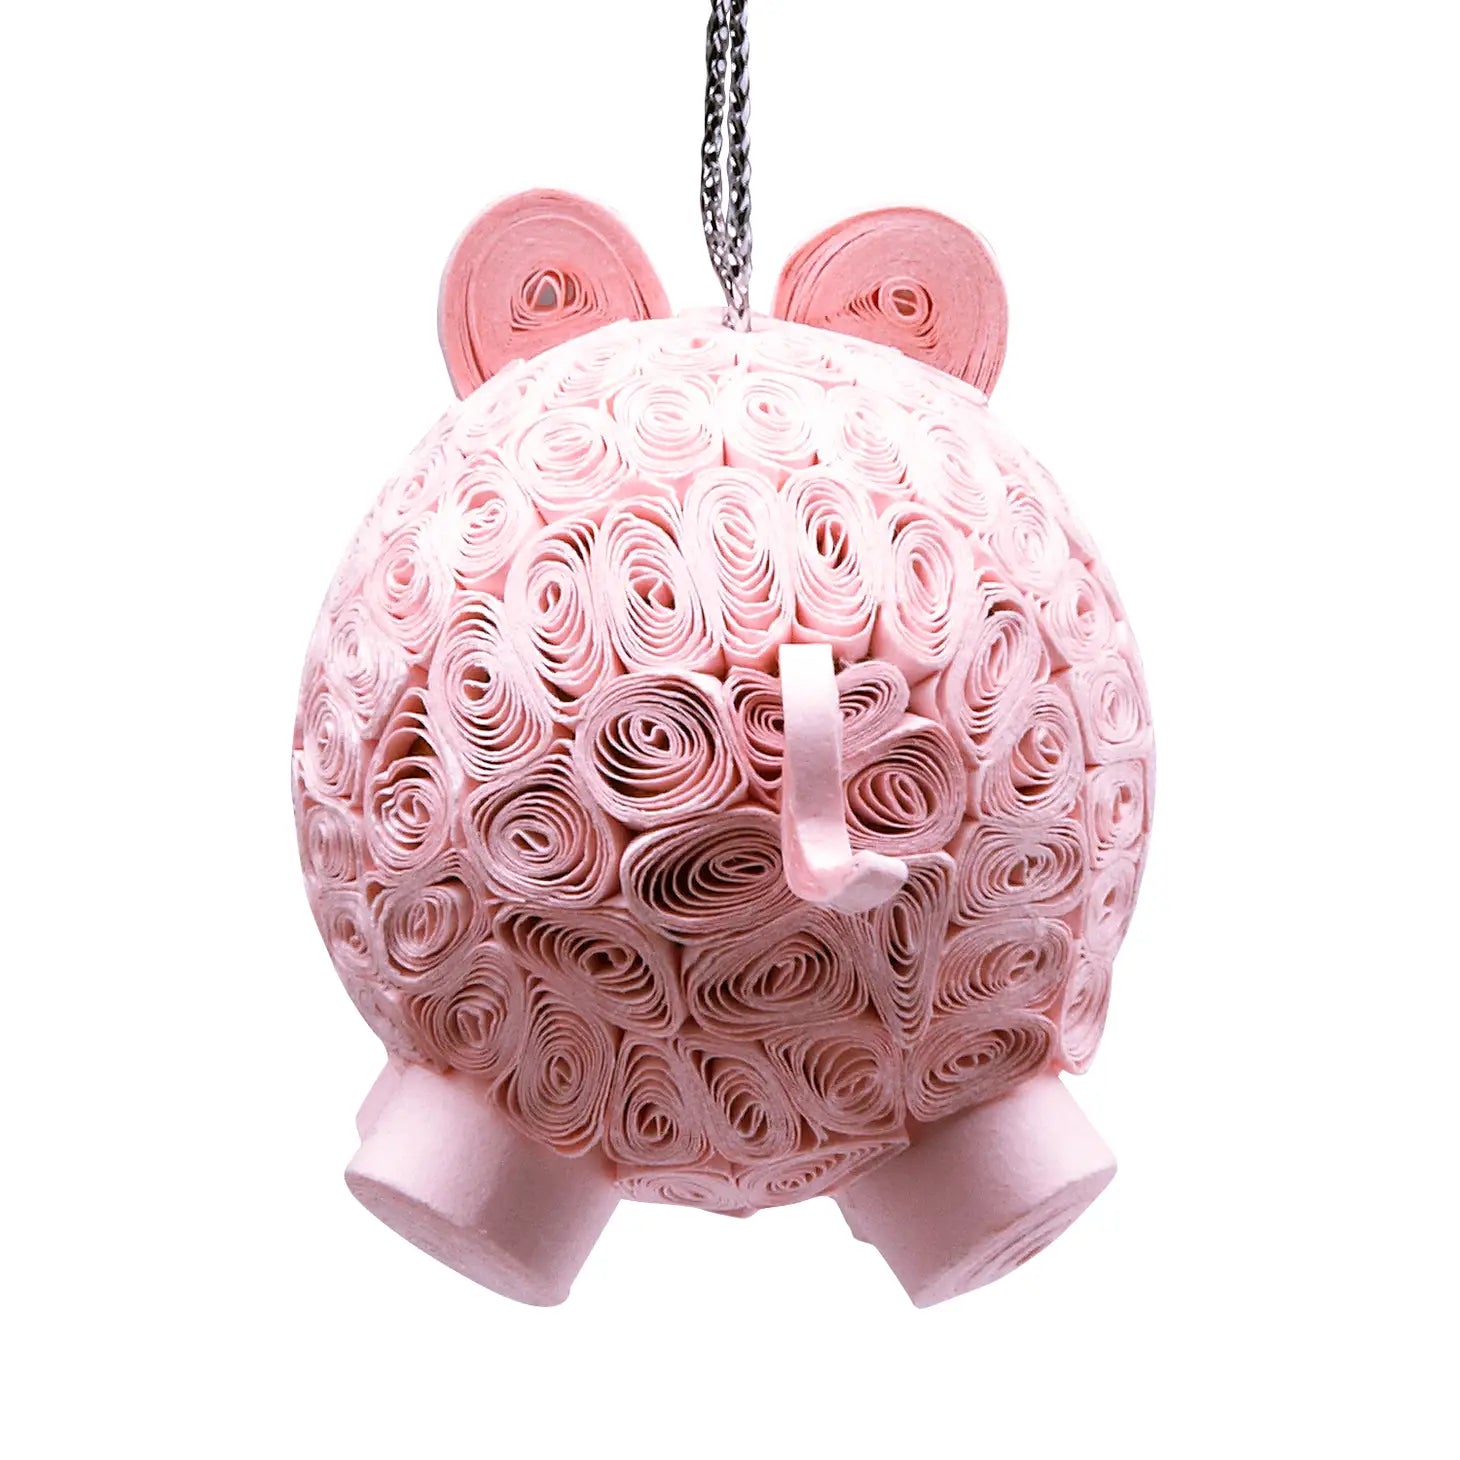 Quilled Smiling Pig Ornament